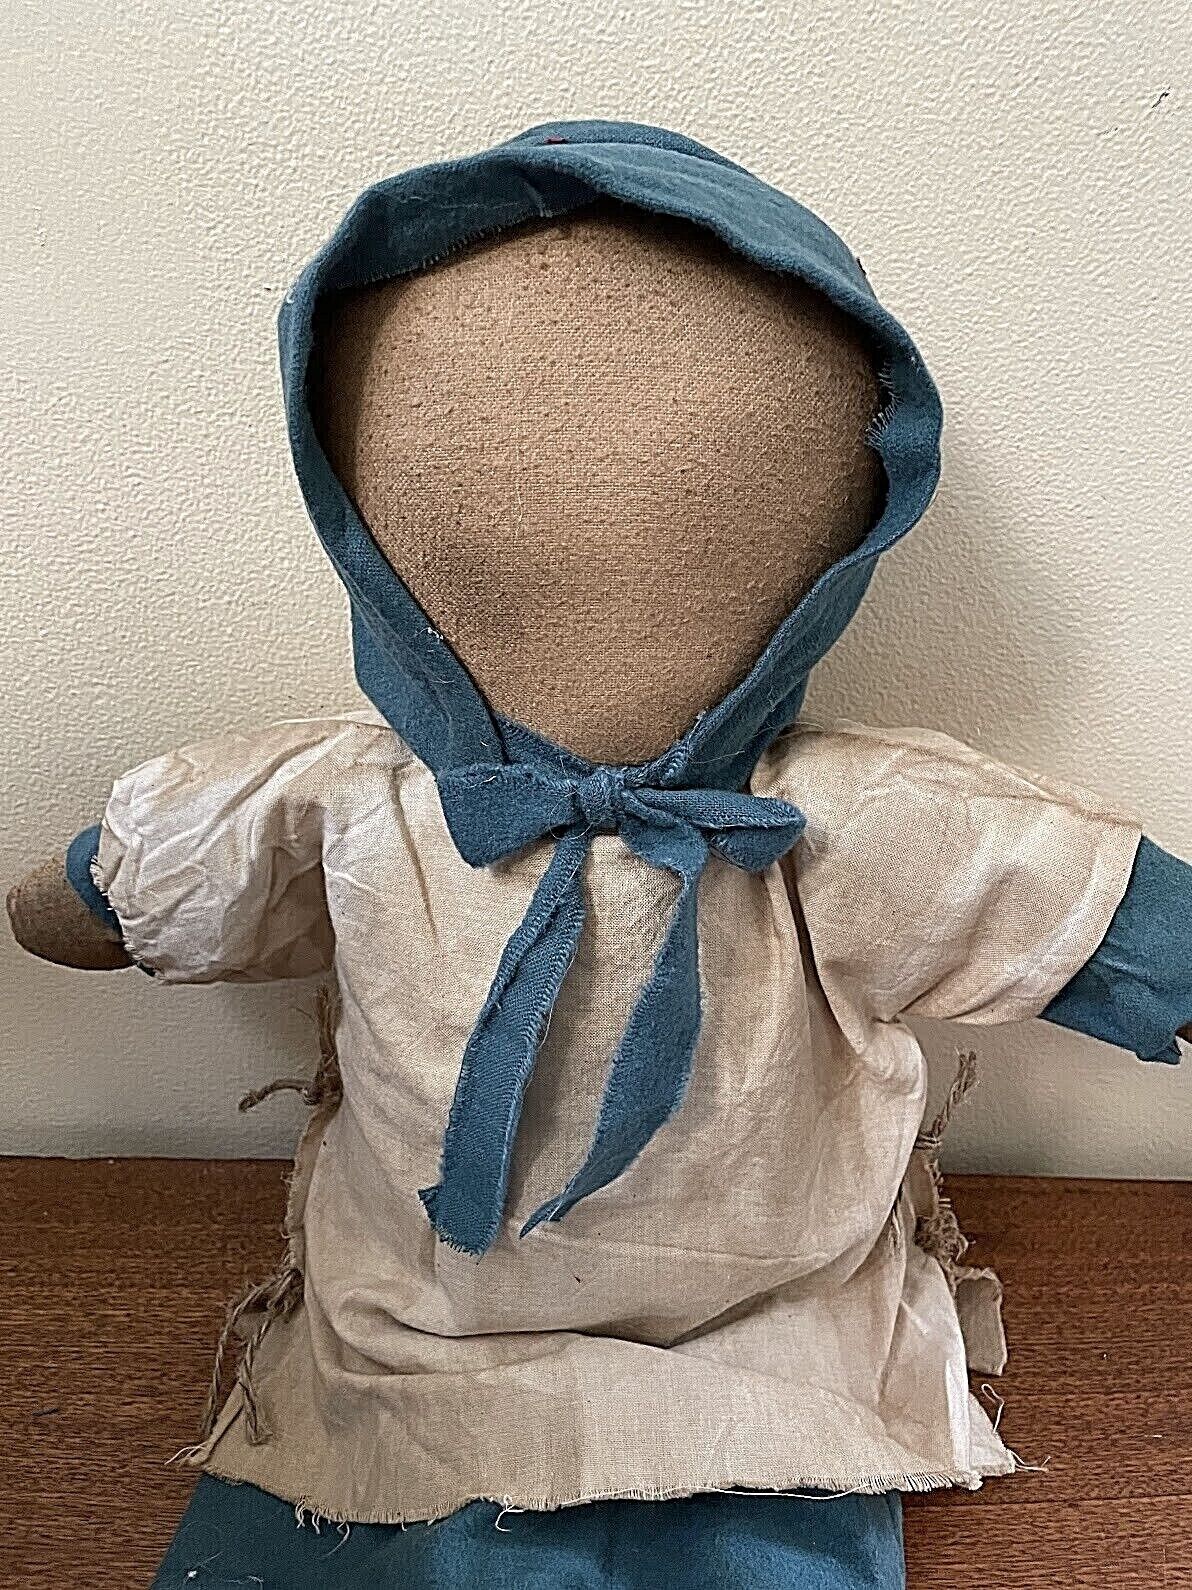 Primitive Handcrafted Folk Art 10&quot; Amish Doll - The Primitive Pineapple Collection